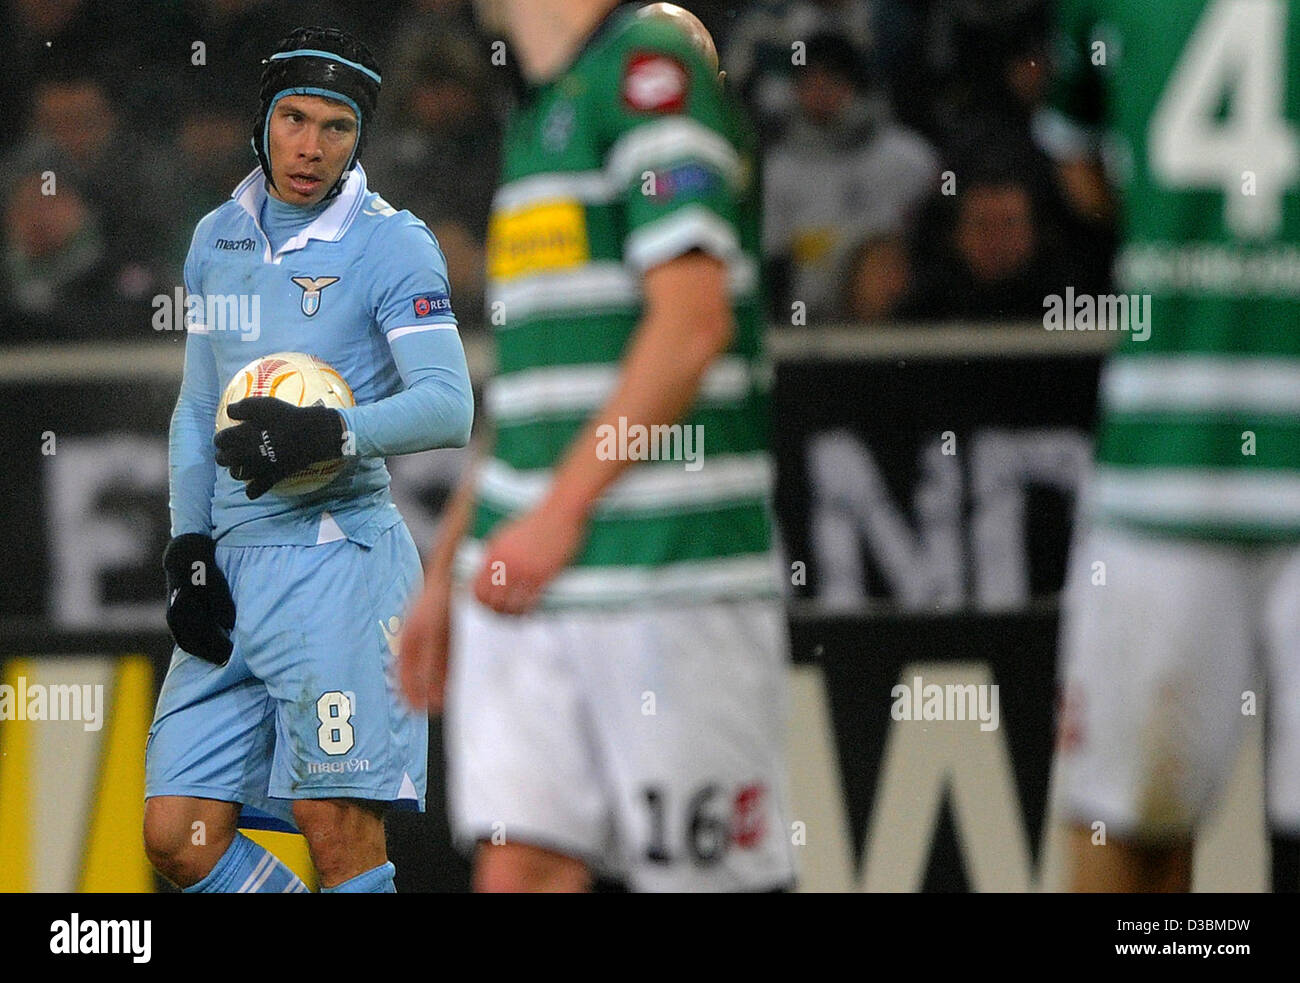 Lazio's Hernanes (l) reacts during the UEFA Europa League Round of 32 first leg soccer match between Borussia Moenchengladbach and Lazio Rome at Borussia-Park Stadium in Moenchengladbach, Germany, 14 February 2013. Photo: Jonas Guettler/dpa Stock Photo